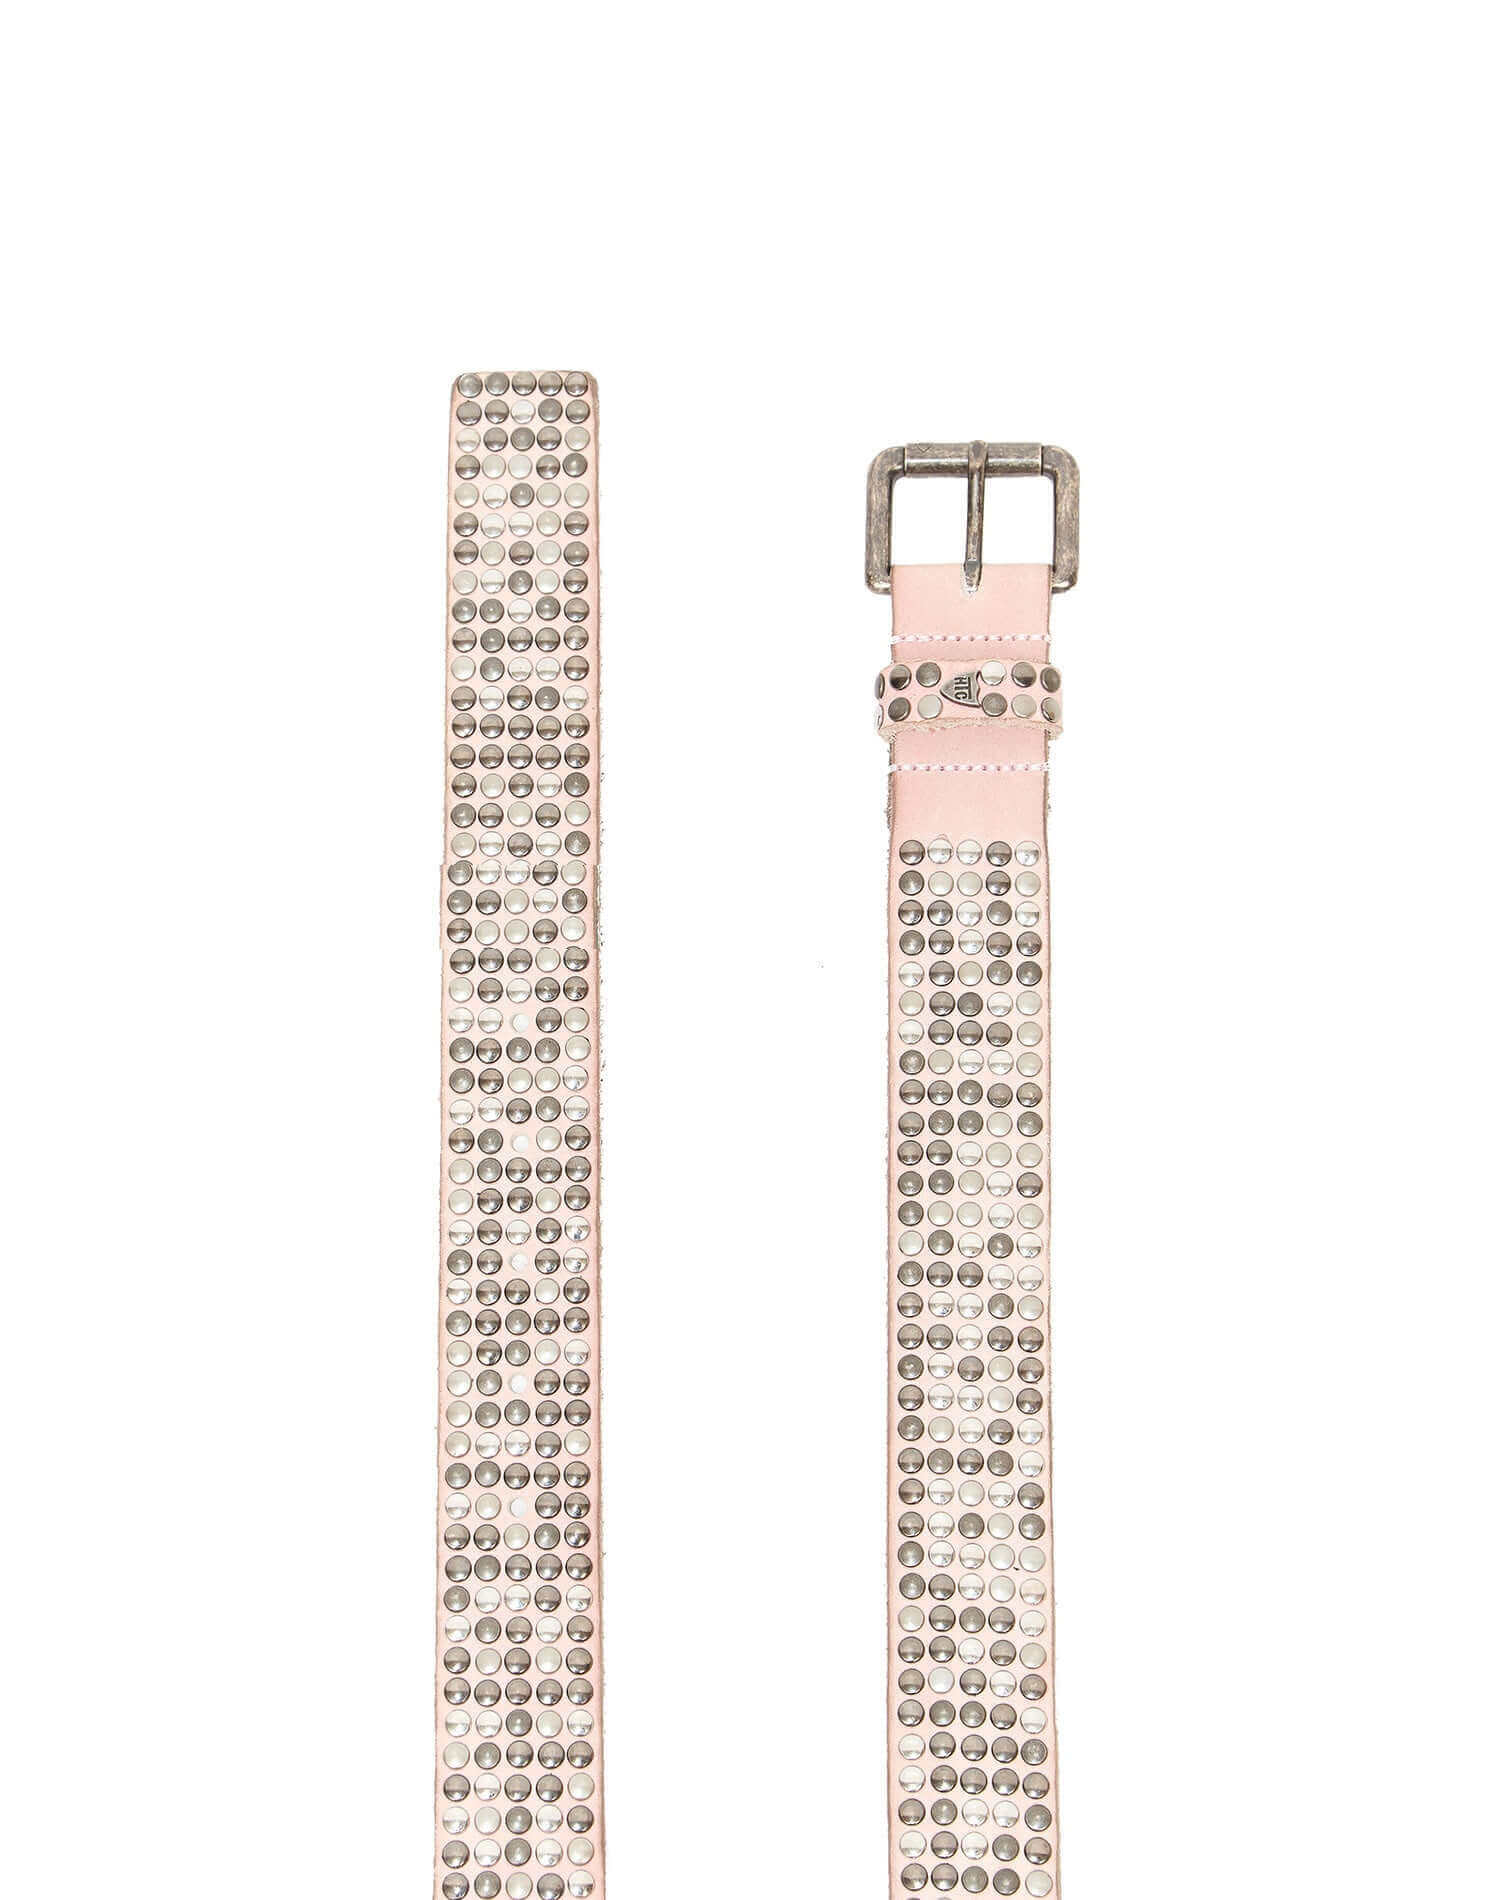 5.000 STUDS COLOR BELT Pink leather belt with mixed studs, brass buckle, studded zamac belt loop with HTC logo rivet. Height: 3.5 cm. Made in Italy. HTC LOS ANGELES